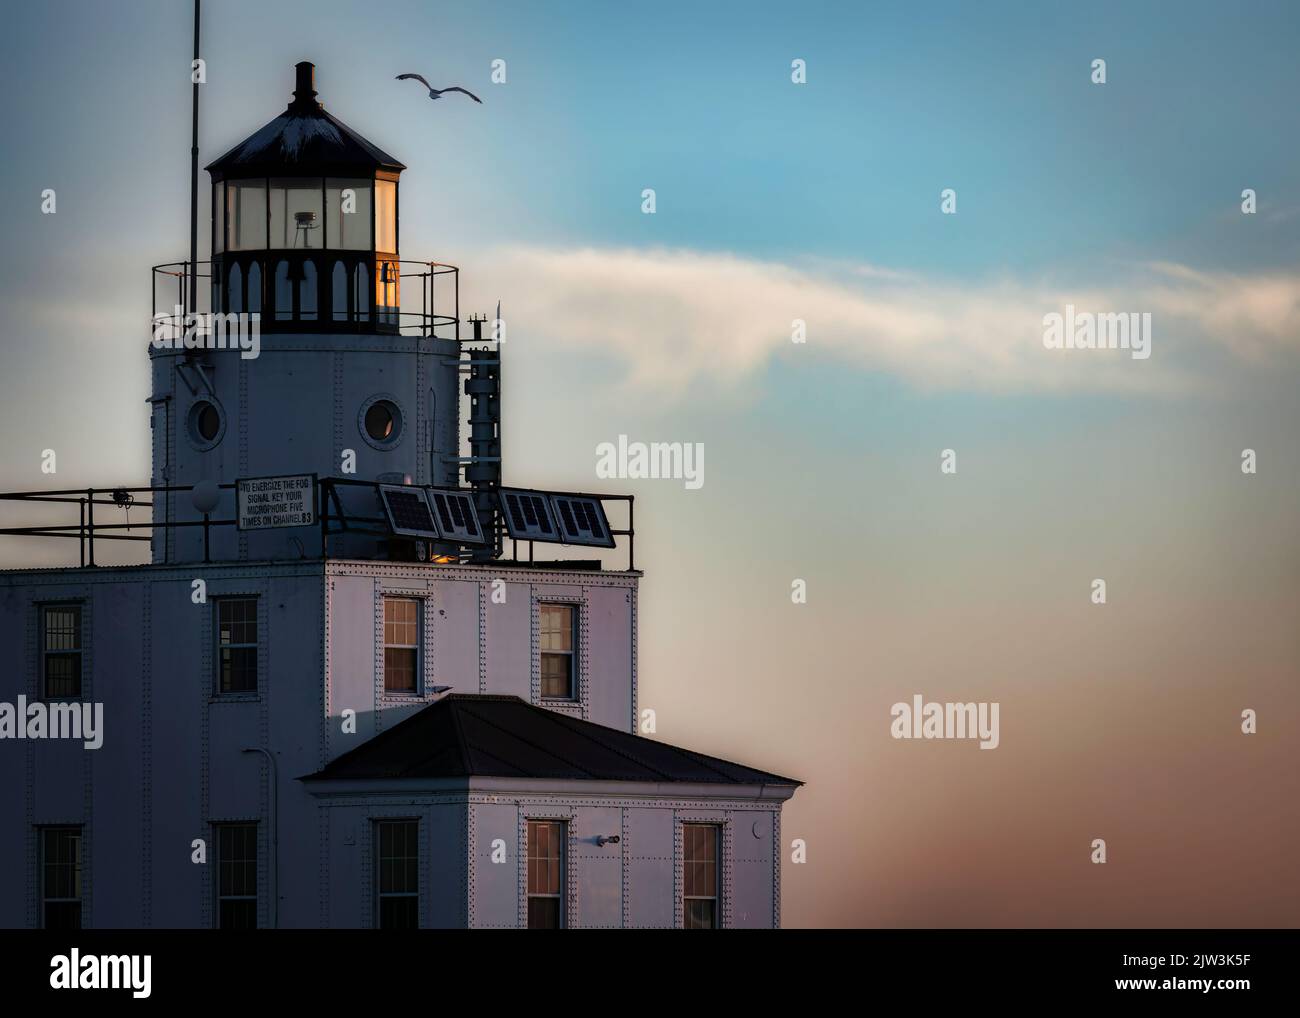 The morning sun begins to shine on the Lake Michigan lighthouse at Manitowoc, Wisconsin. Stock Photo